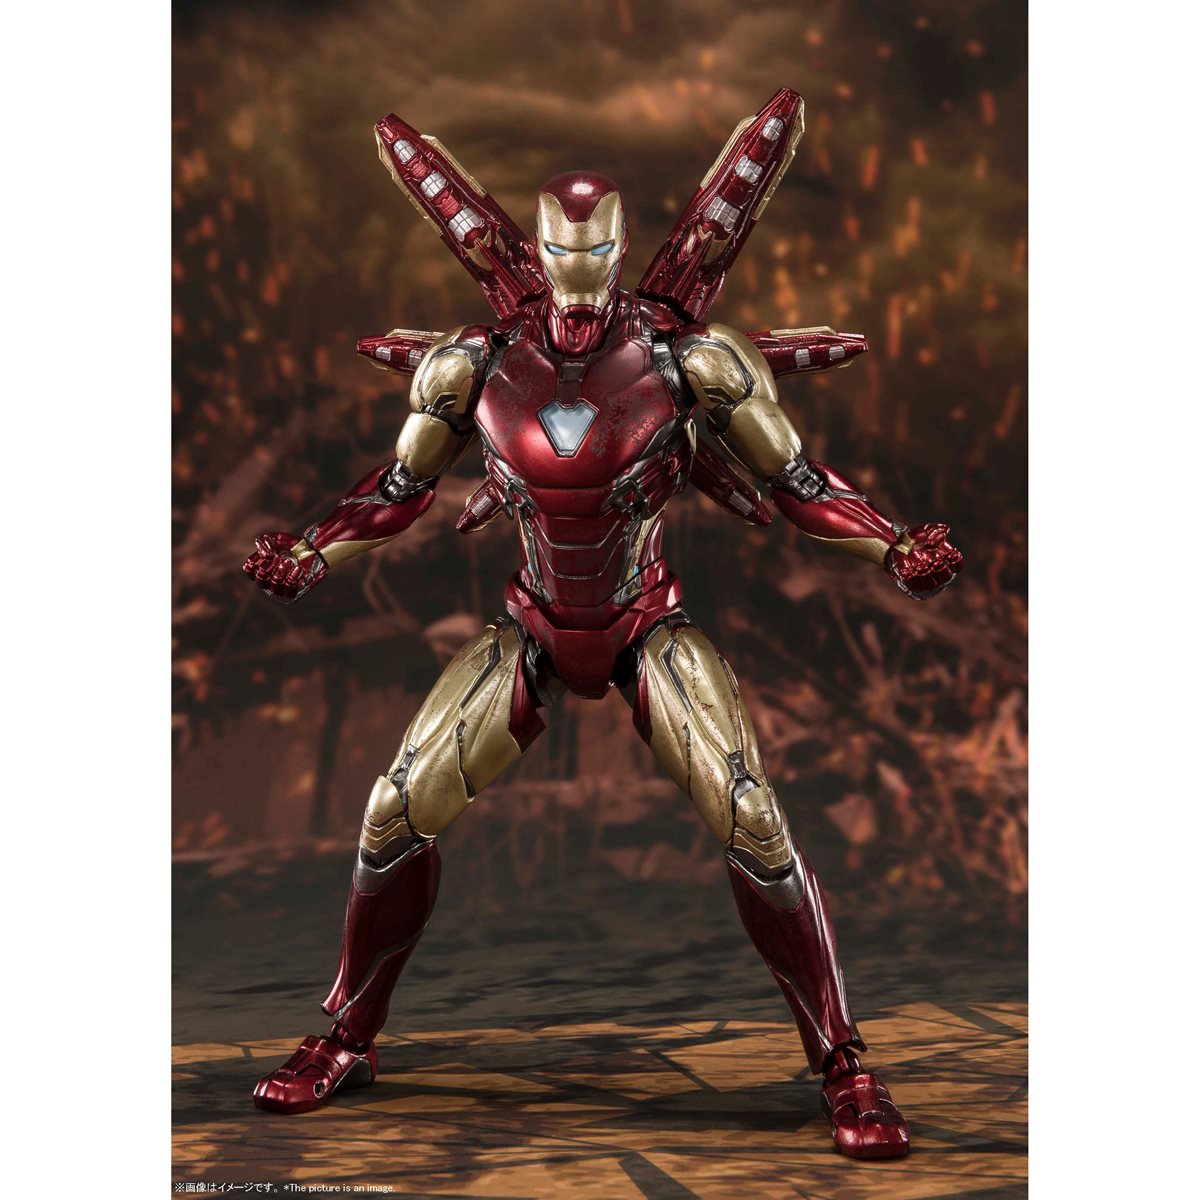 Bandai S.H Figuarts Iron Man Mark 85 Avengers End Game for sale online